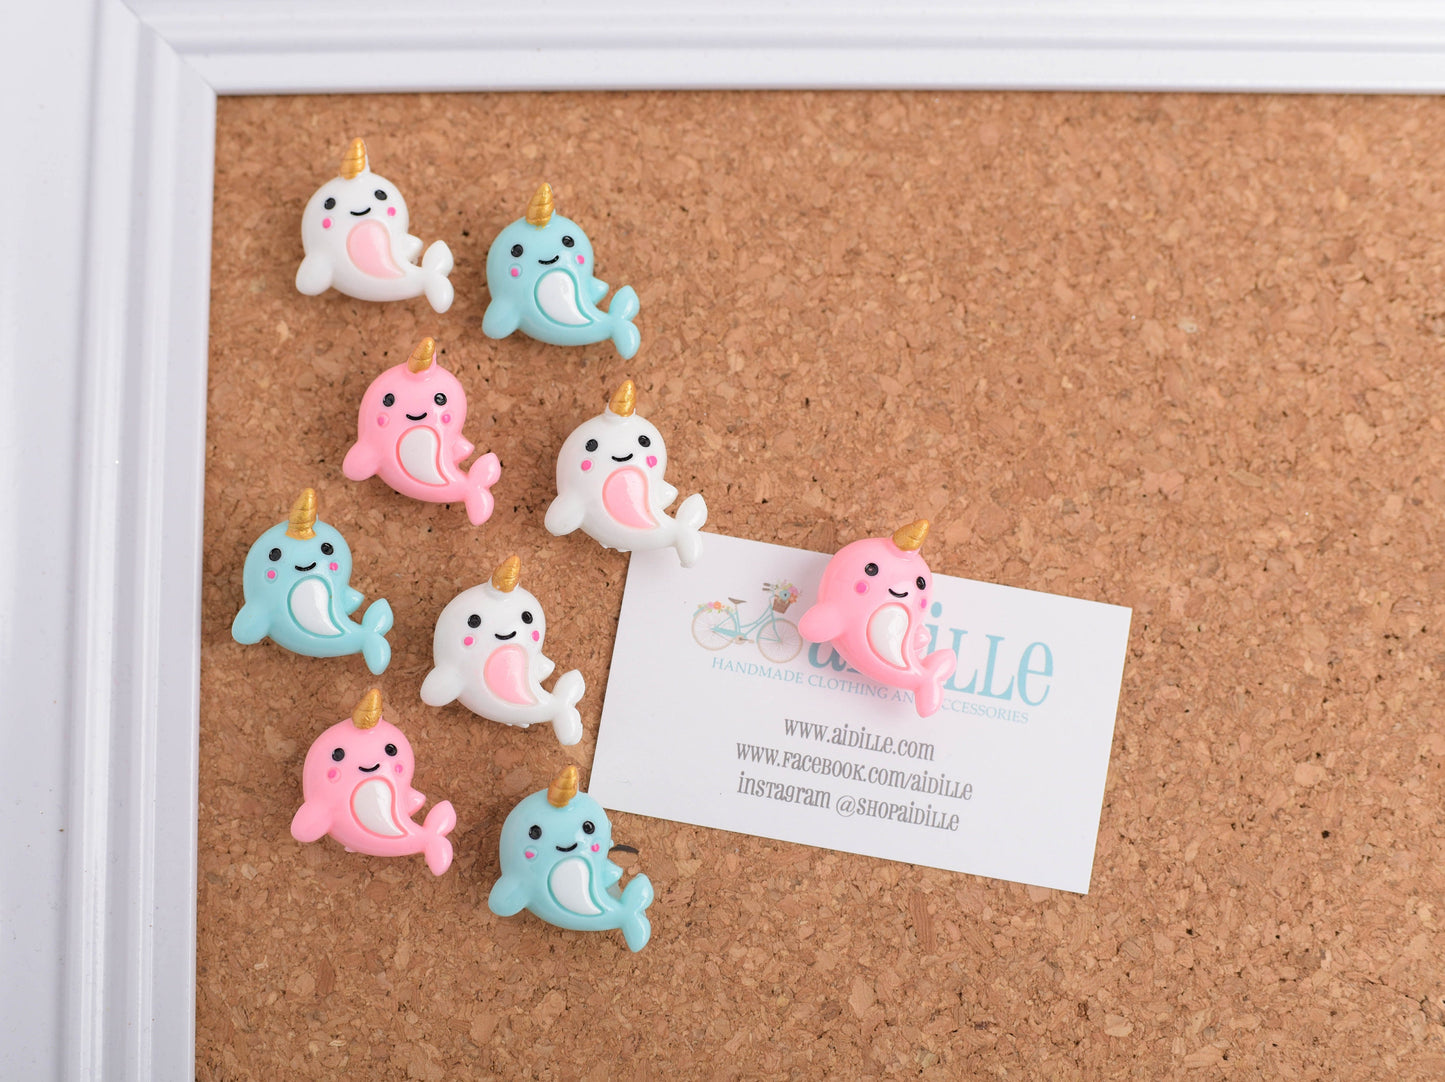 Narwhal Unicorn of the Sea Push Pins- Set of 9